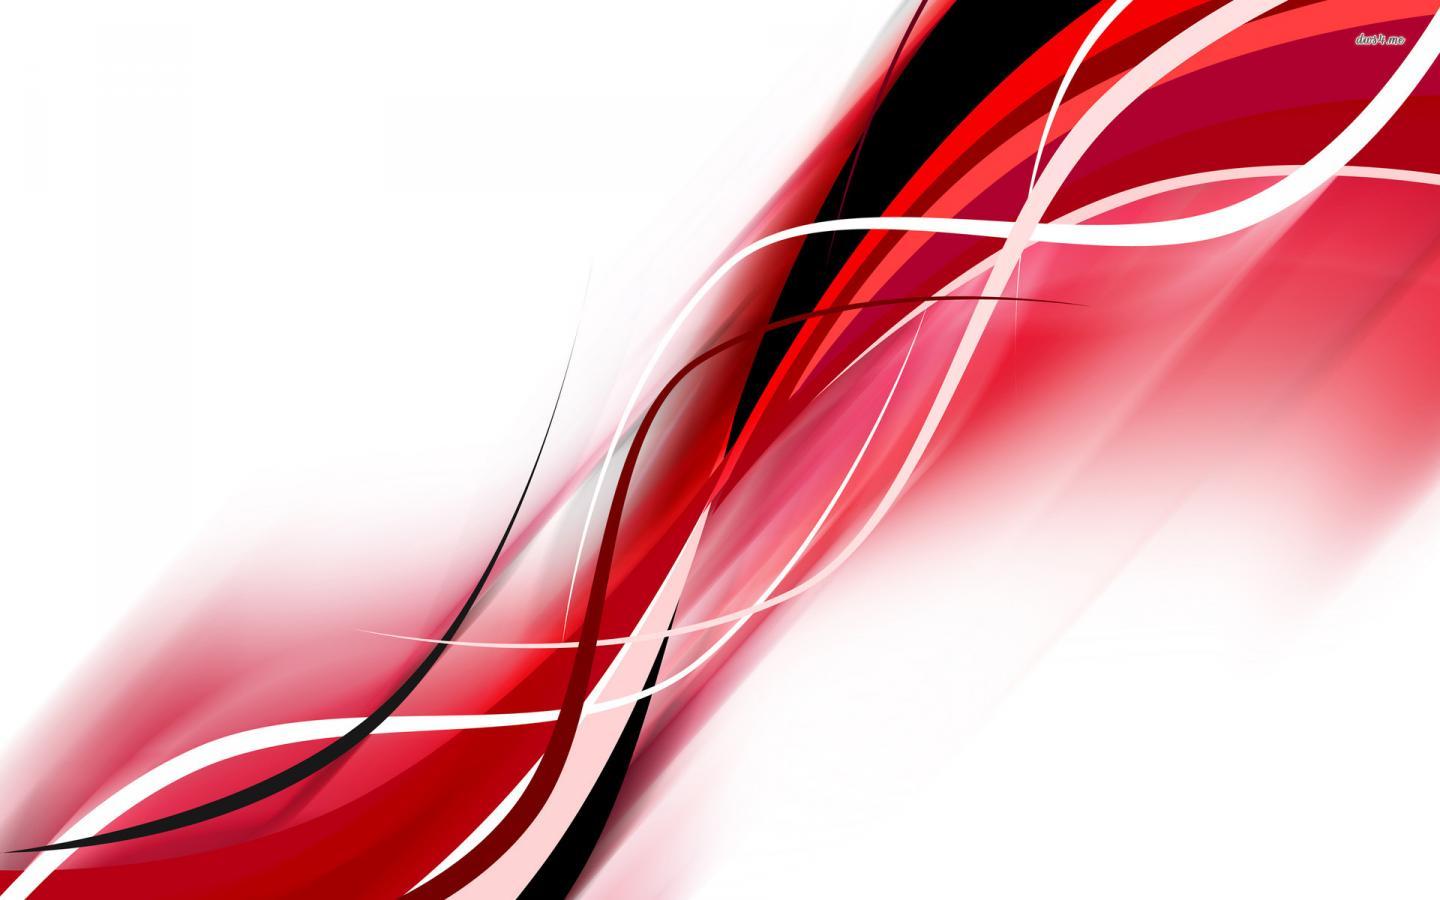 White Red Abstract Wallpaper HD Background 8 HD Wallpaper. lzamgs